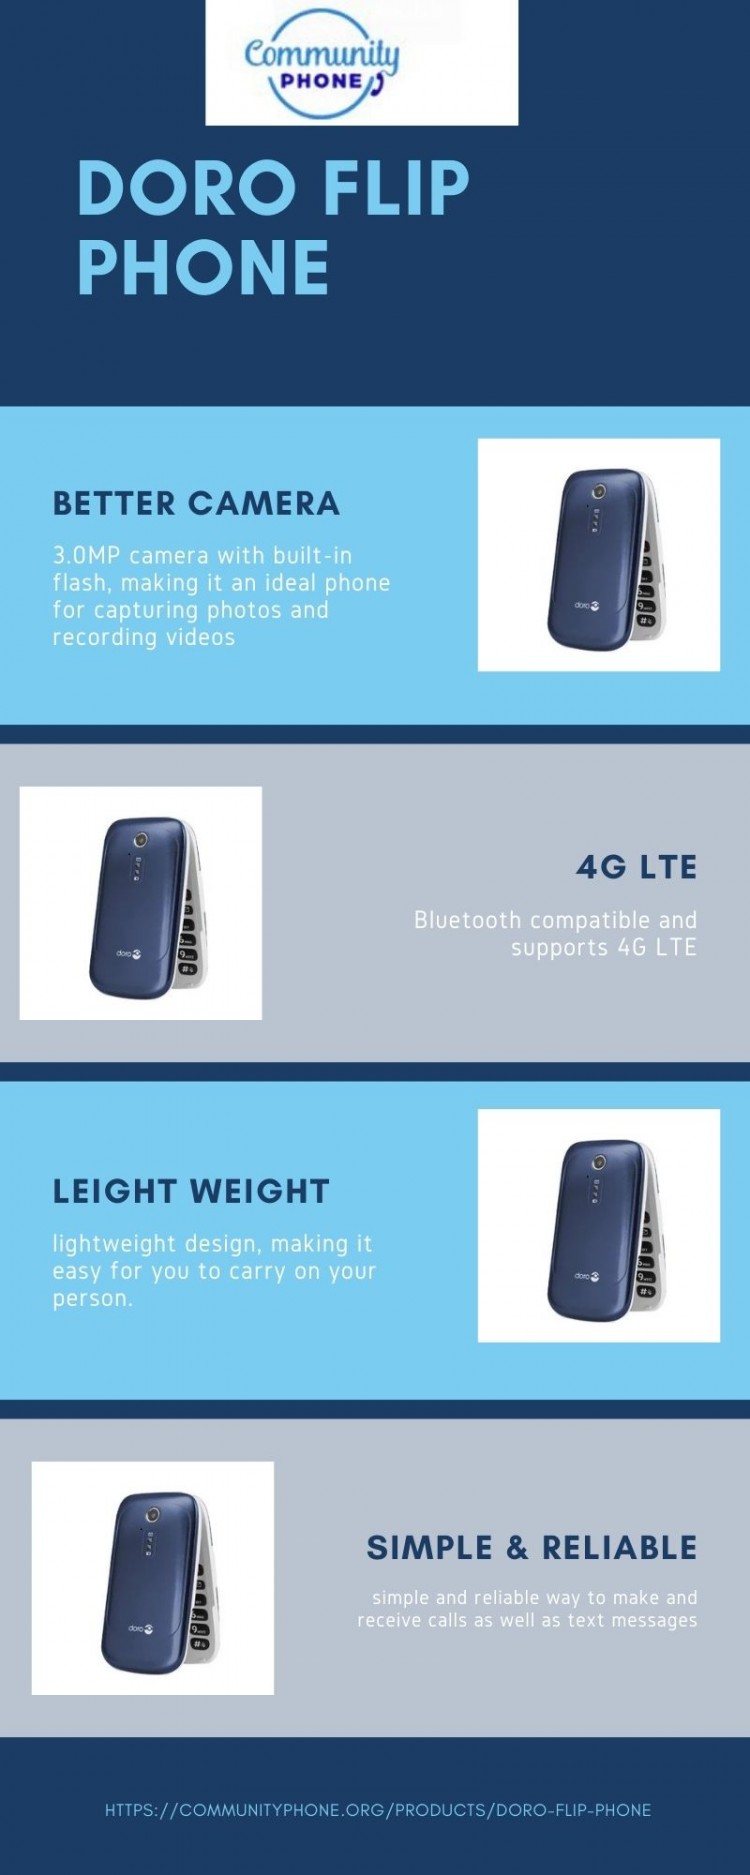 Doro Flip Phone is the excellent phone and have features a 3.0MP camera with built-in flash, making it an ideal phone for capturing photos. https://bit.ly/3jQXqJu